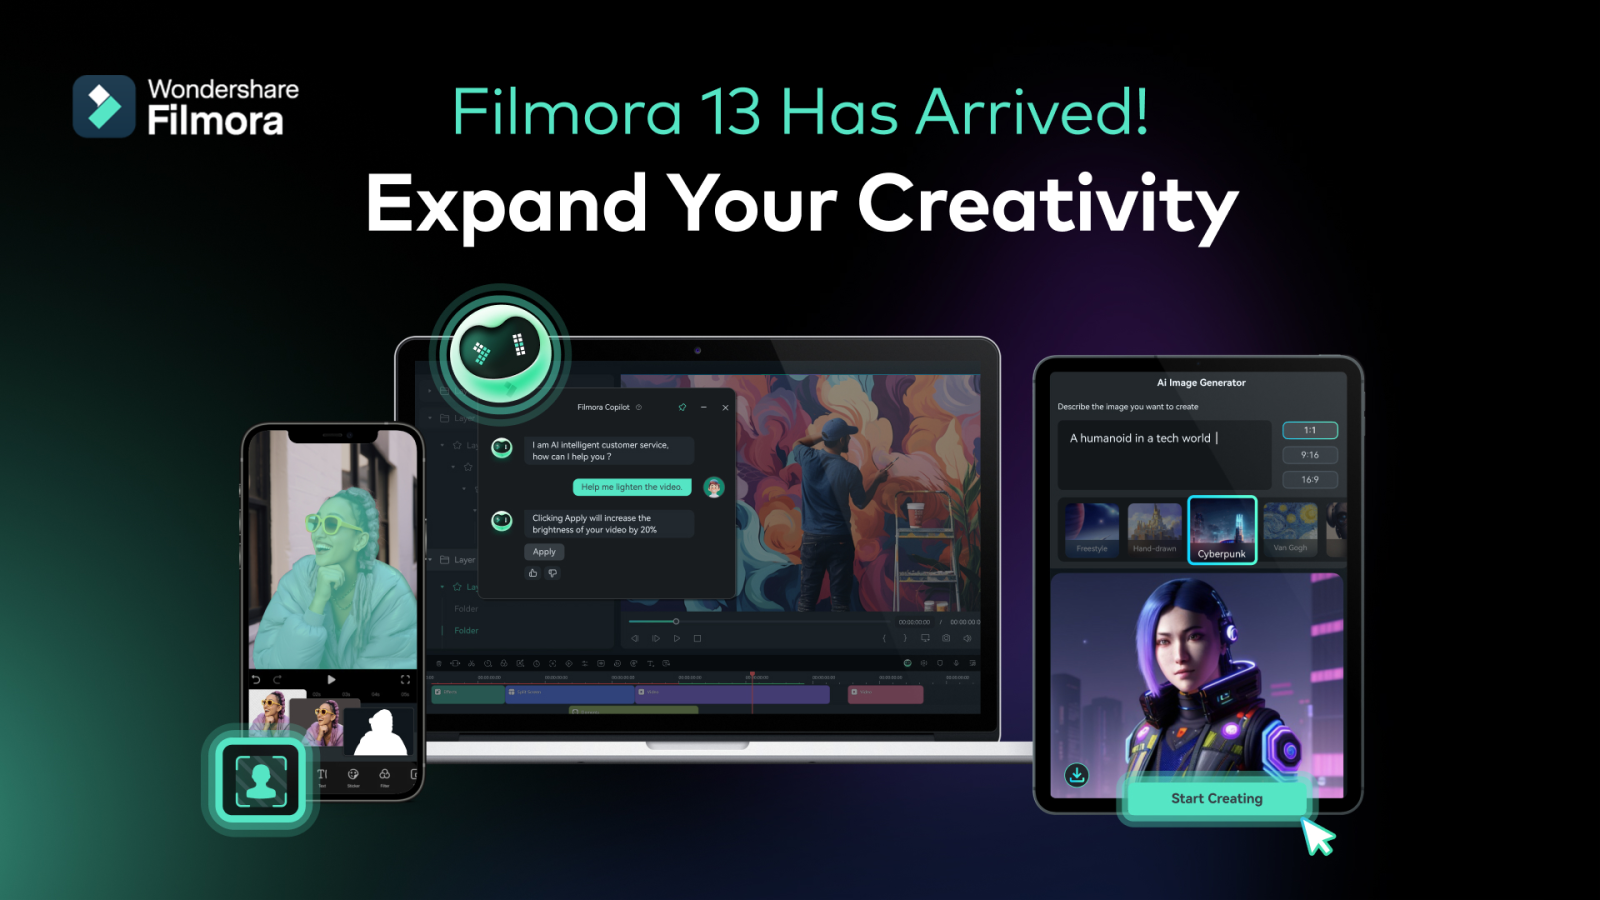 Filmora 13 aims to revamp content creation with AI tools! - 9to5Mac